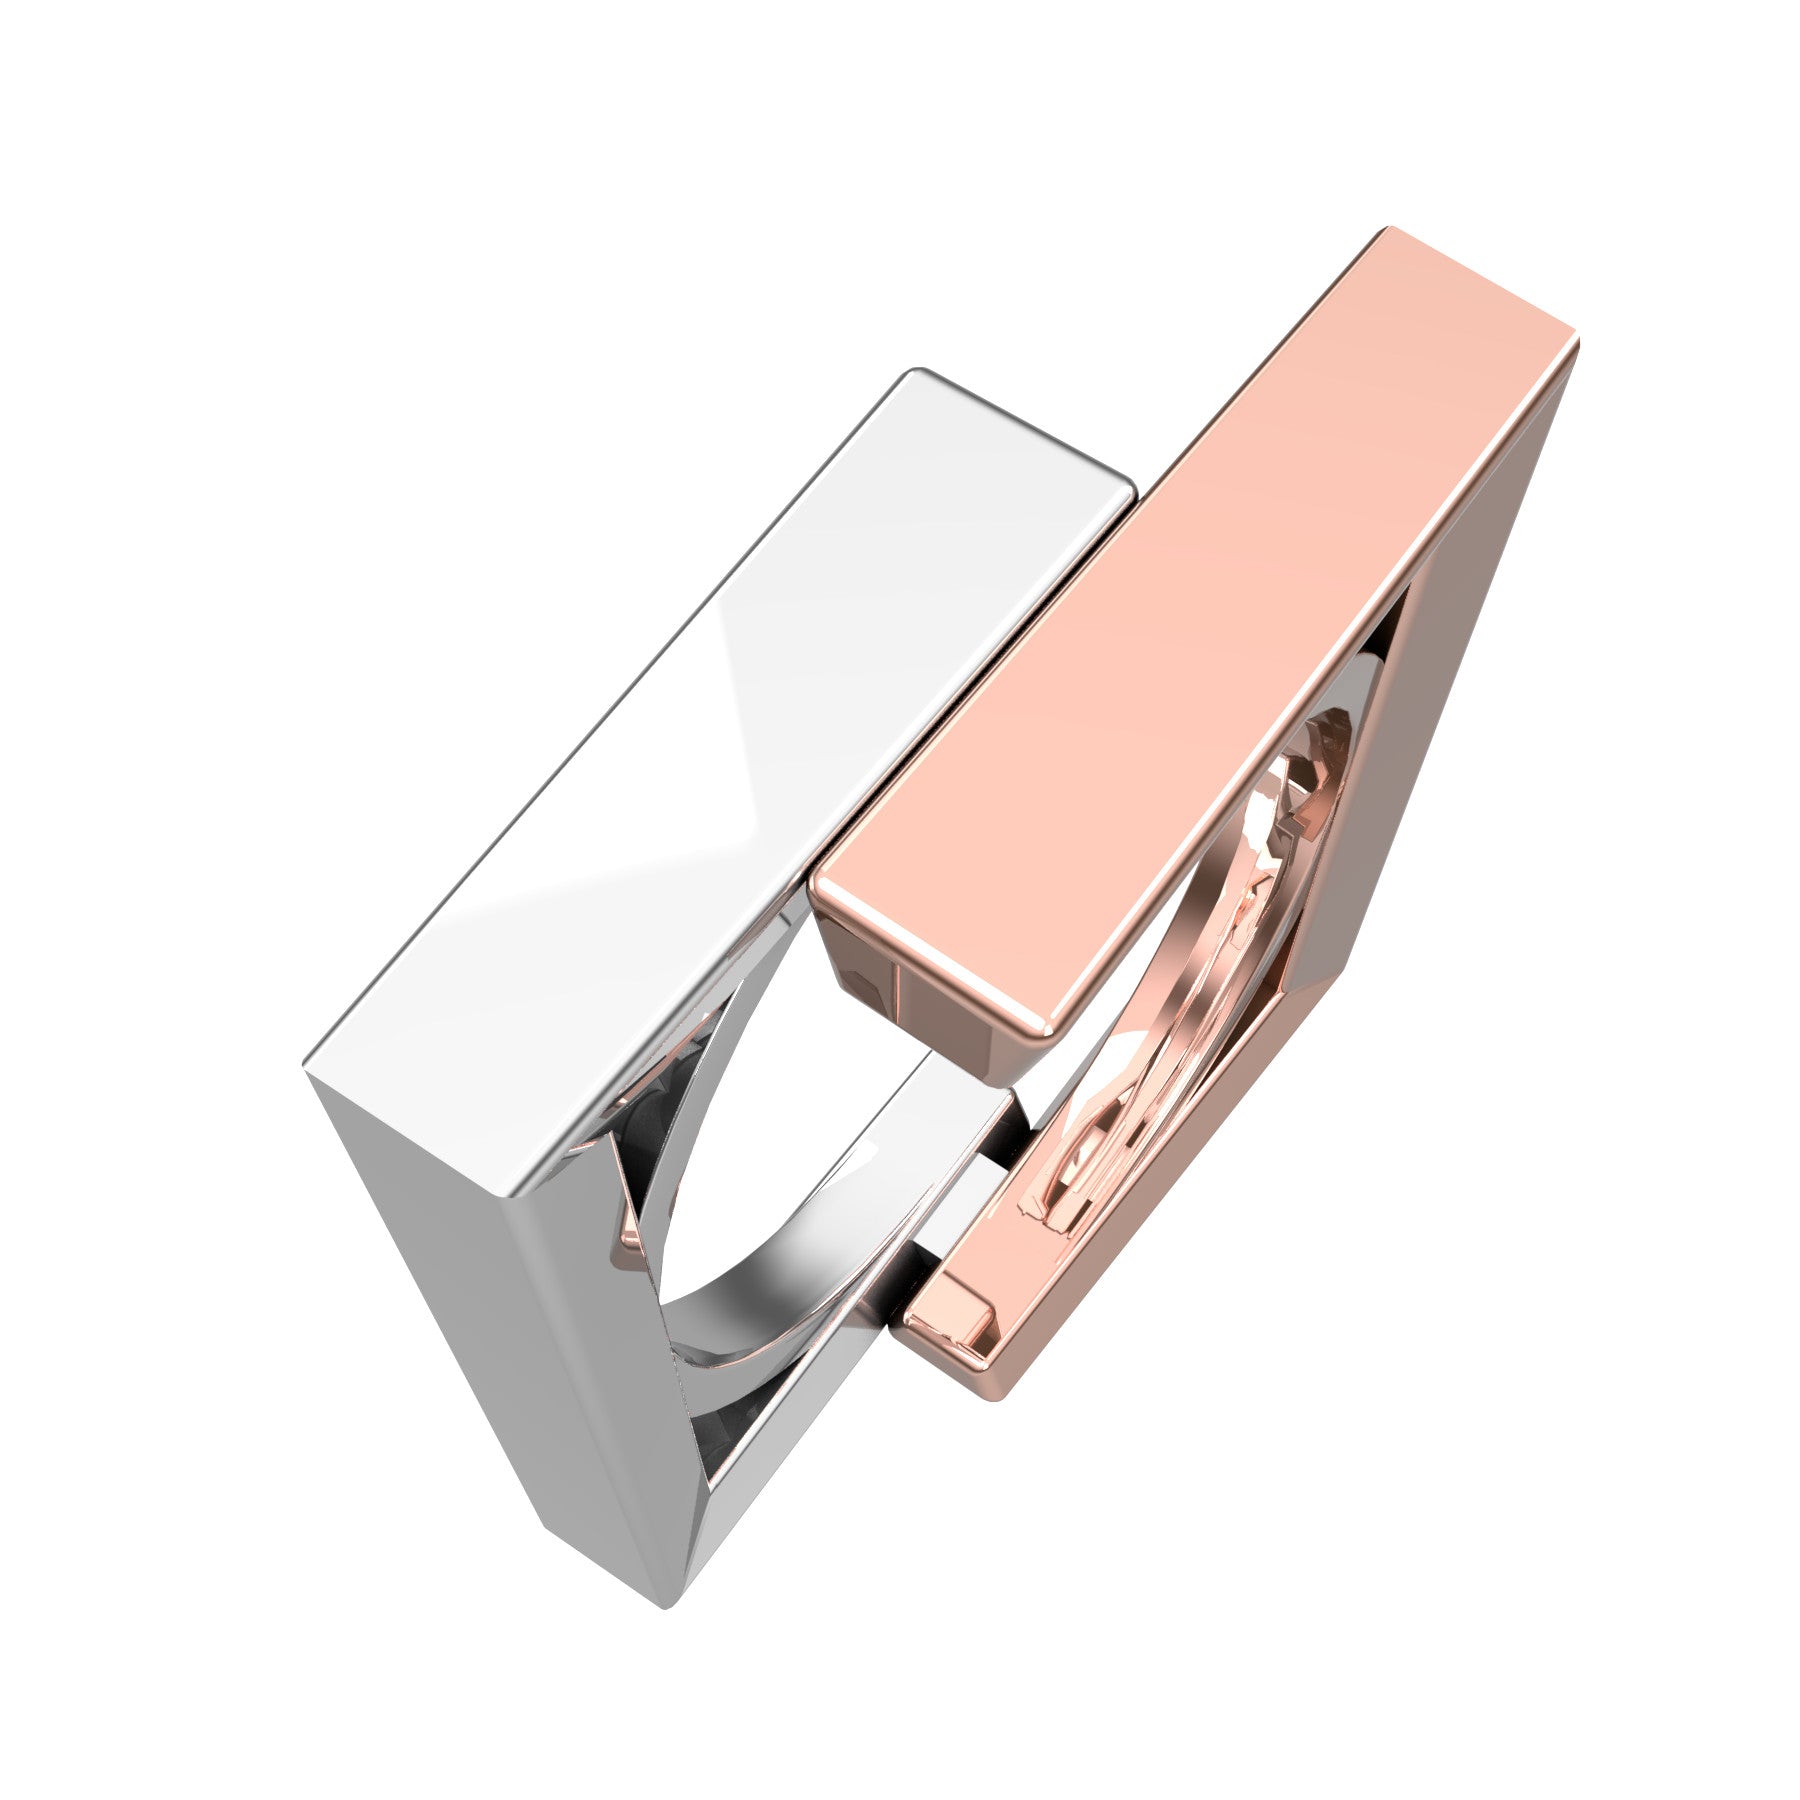 contrary ring, 18 K pink and white gold, weight about 13,8 g. (0.49 oz), width 9,5 mm max